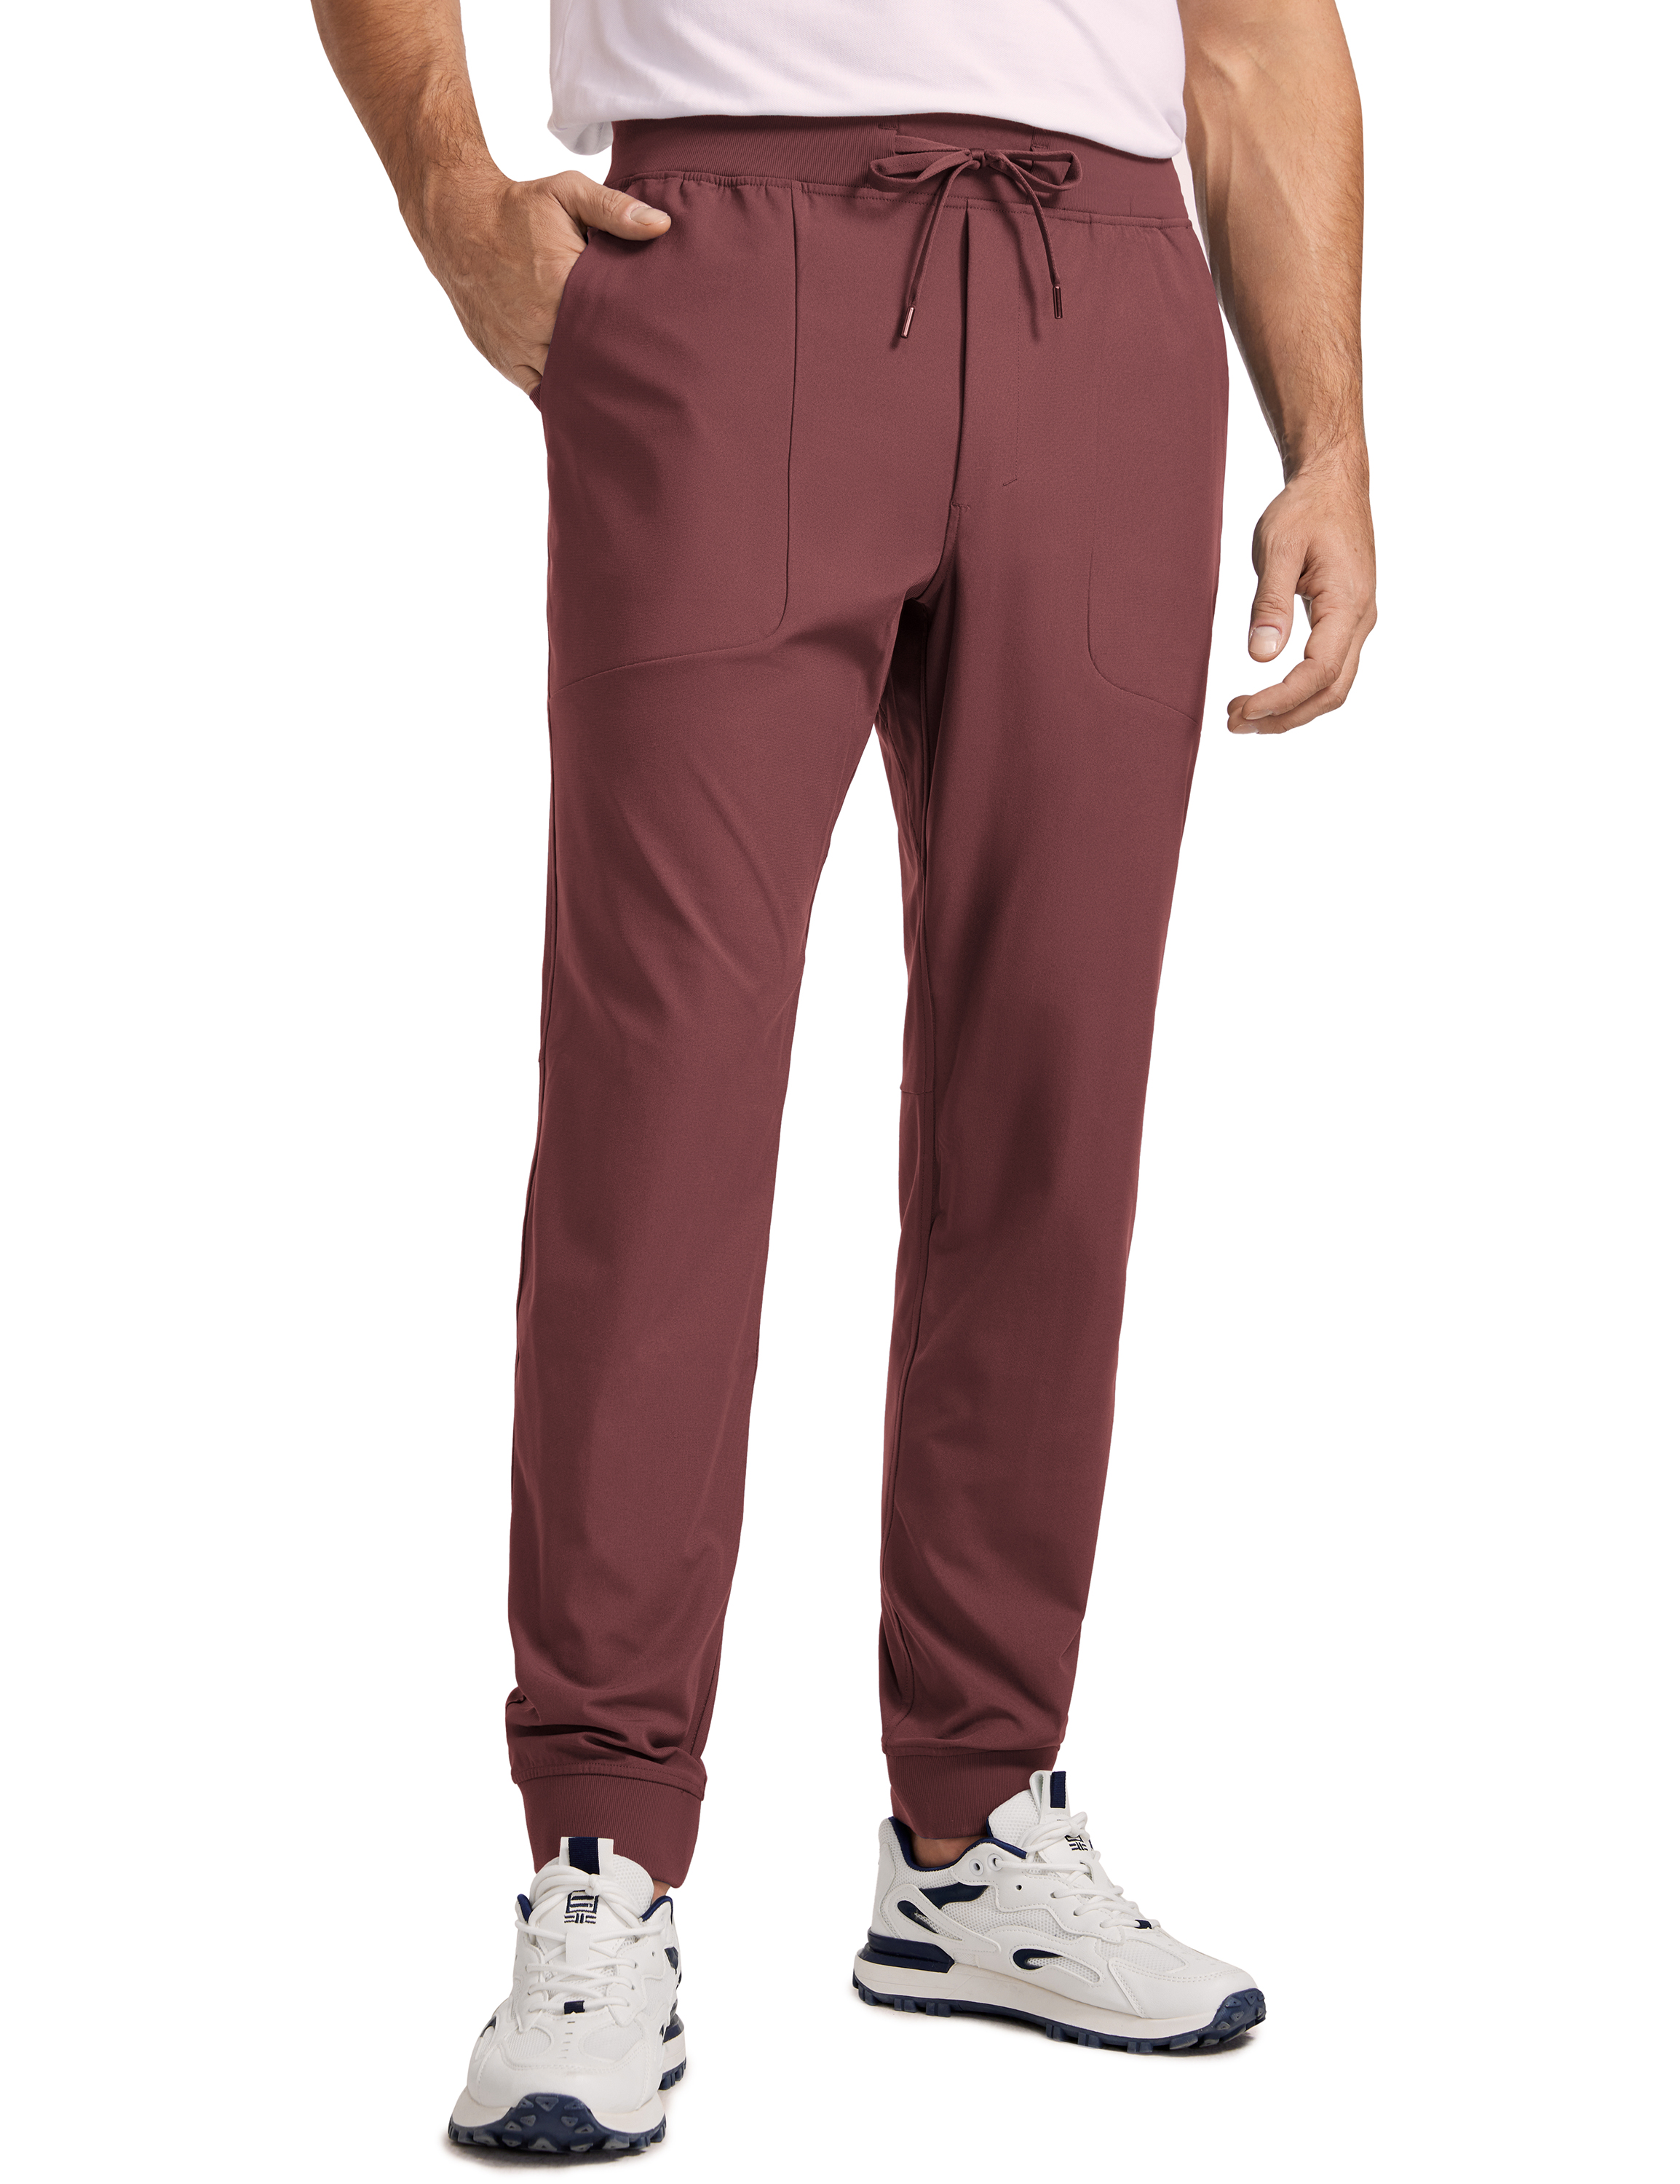 CRZ YOGA All Day Comfy Mens Golf Pants 30 Inches Slim-Fit Joggers